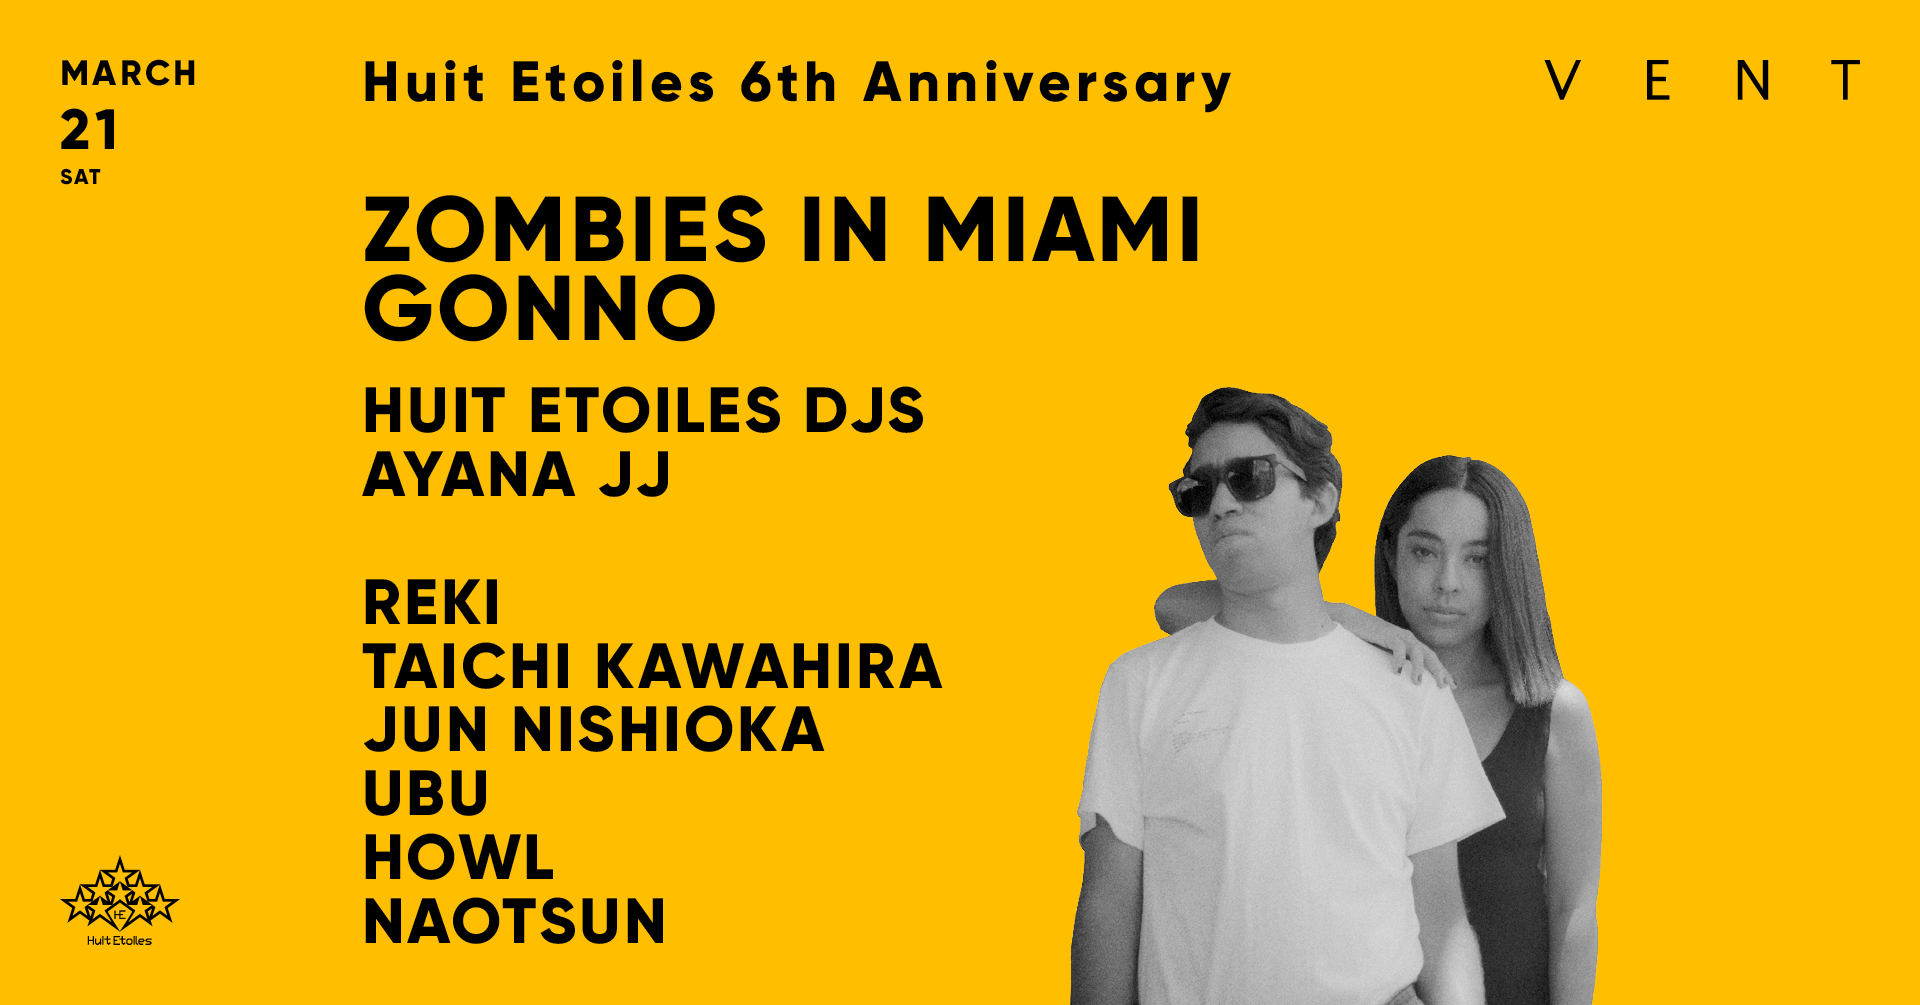 Zombies in Miami at Huit Etoiles 6th Anniversary